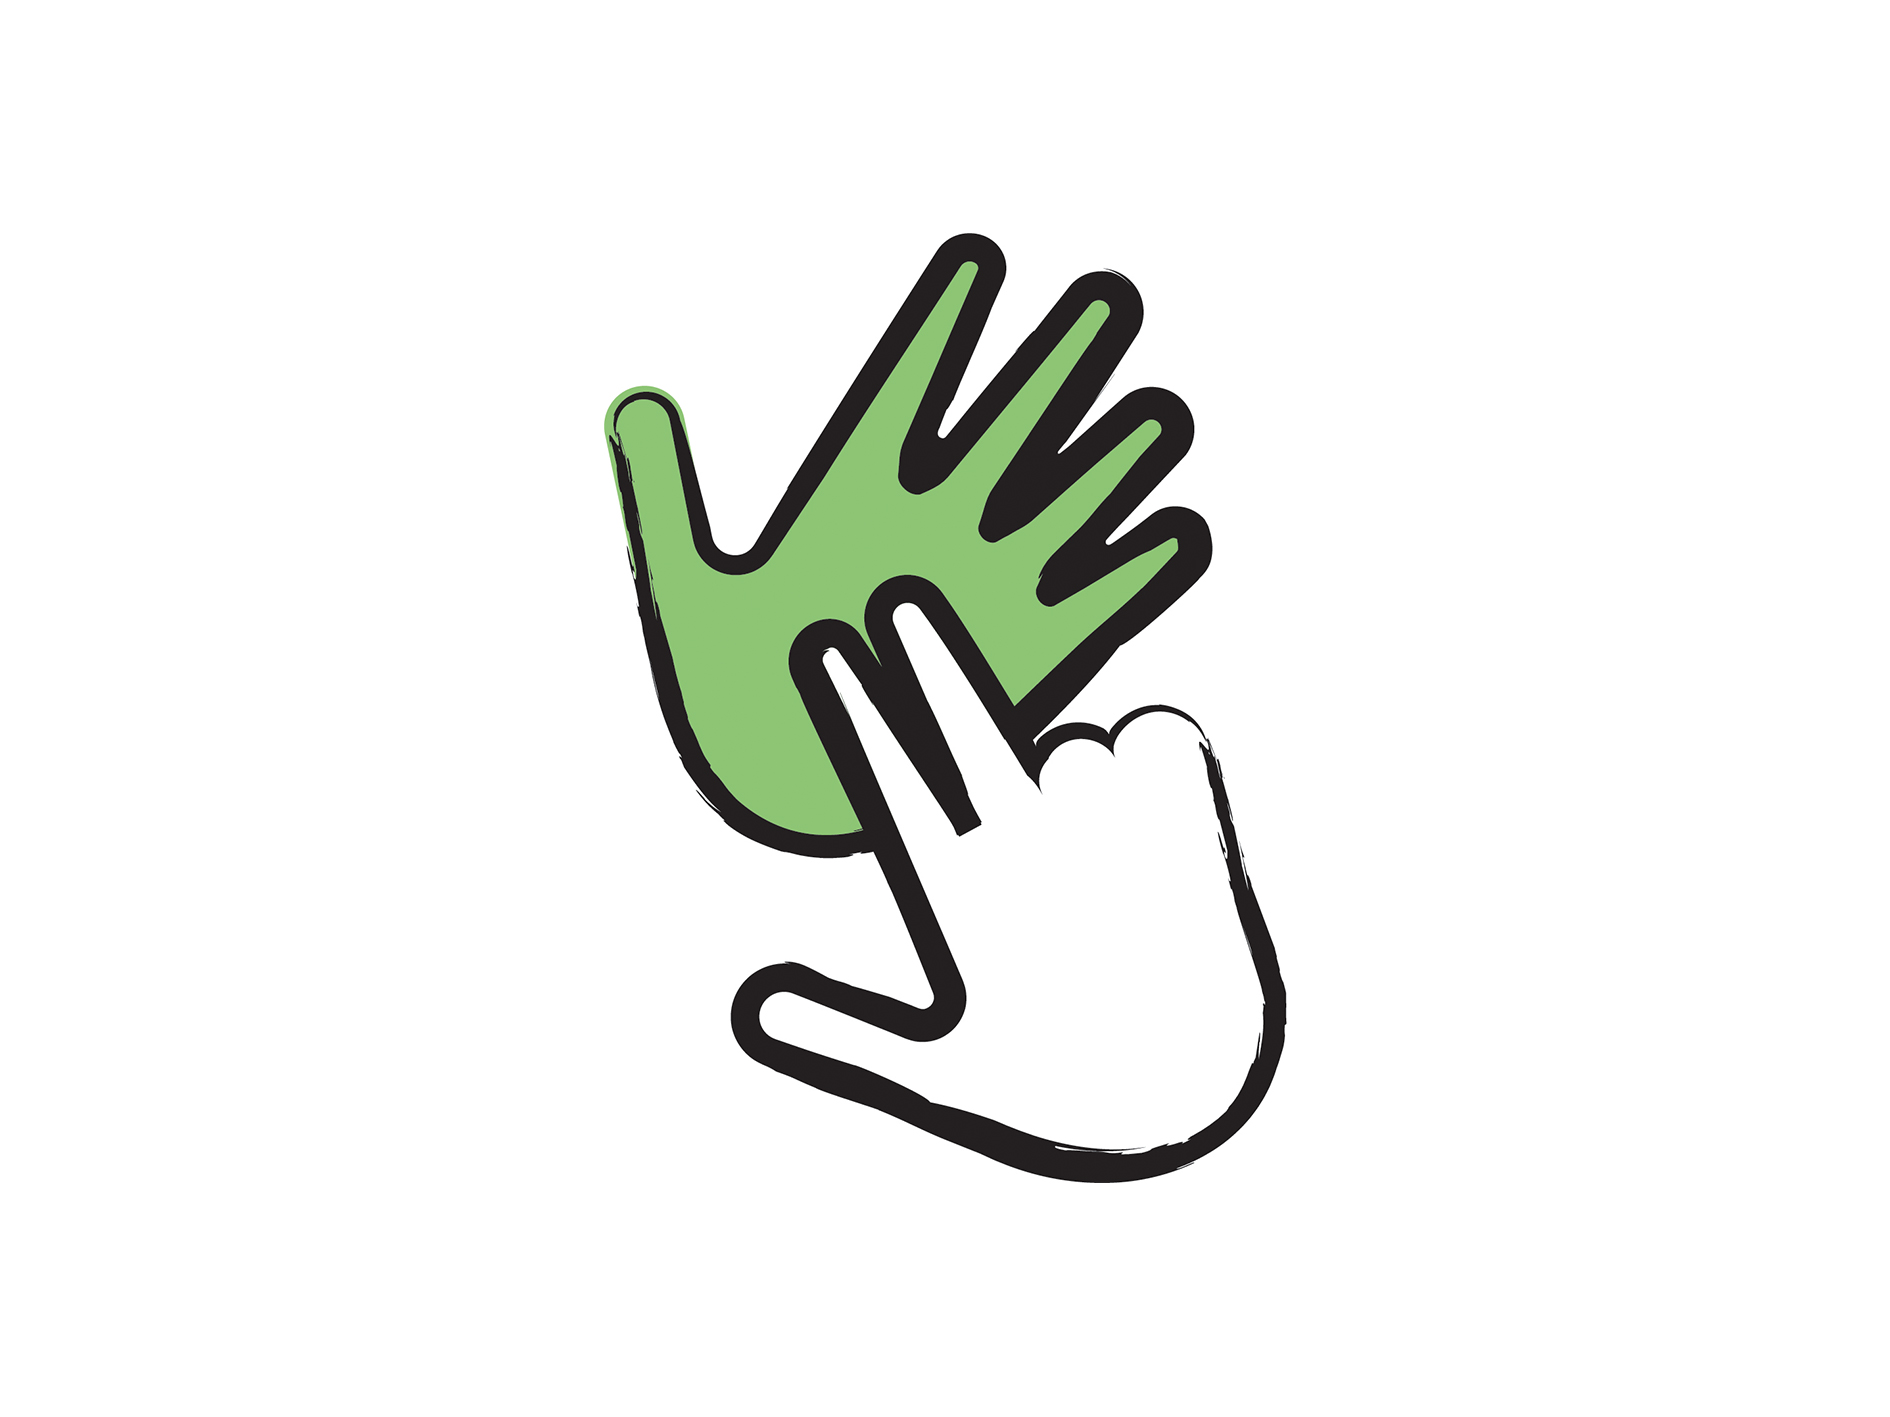 An icon representing two-hand manual communication.